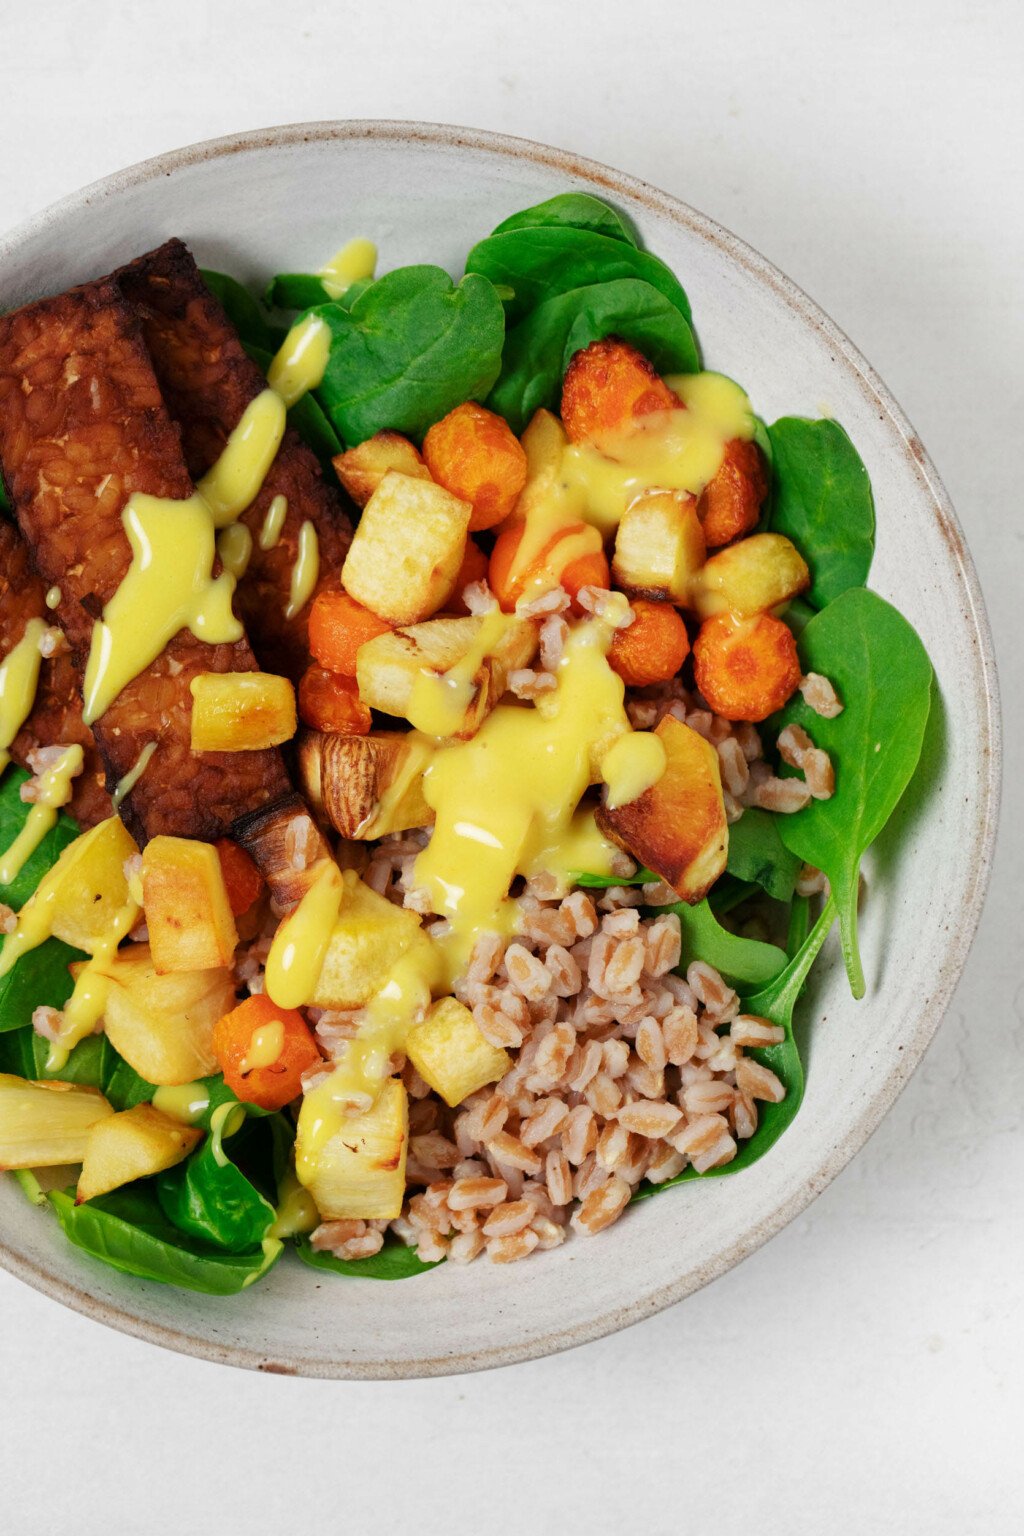 An overhead image of vegan harvest bowls, made with tempeh and root vegetables and drizzled with a mustard-based sauce.